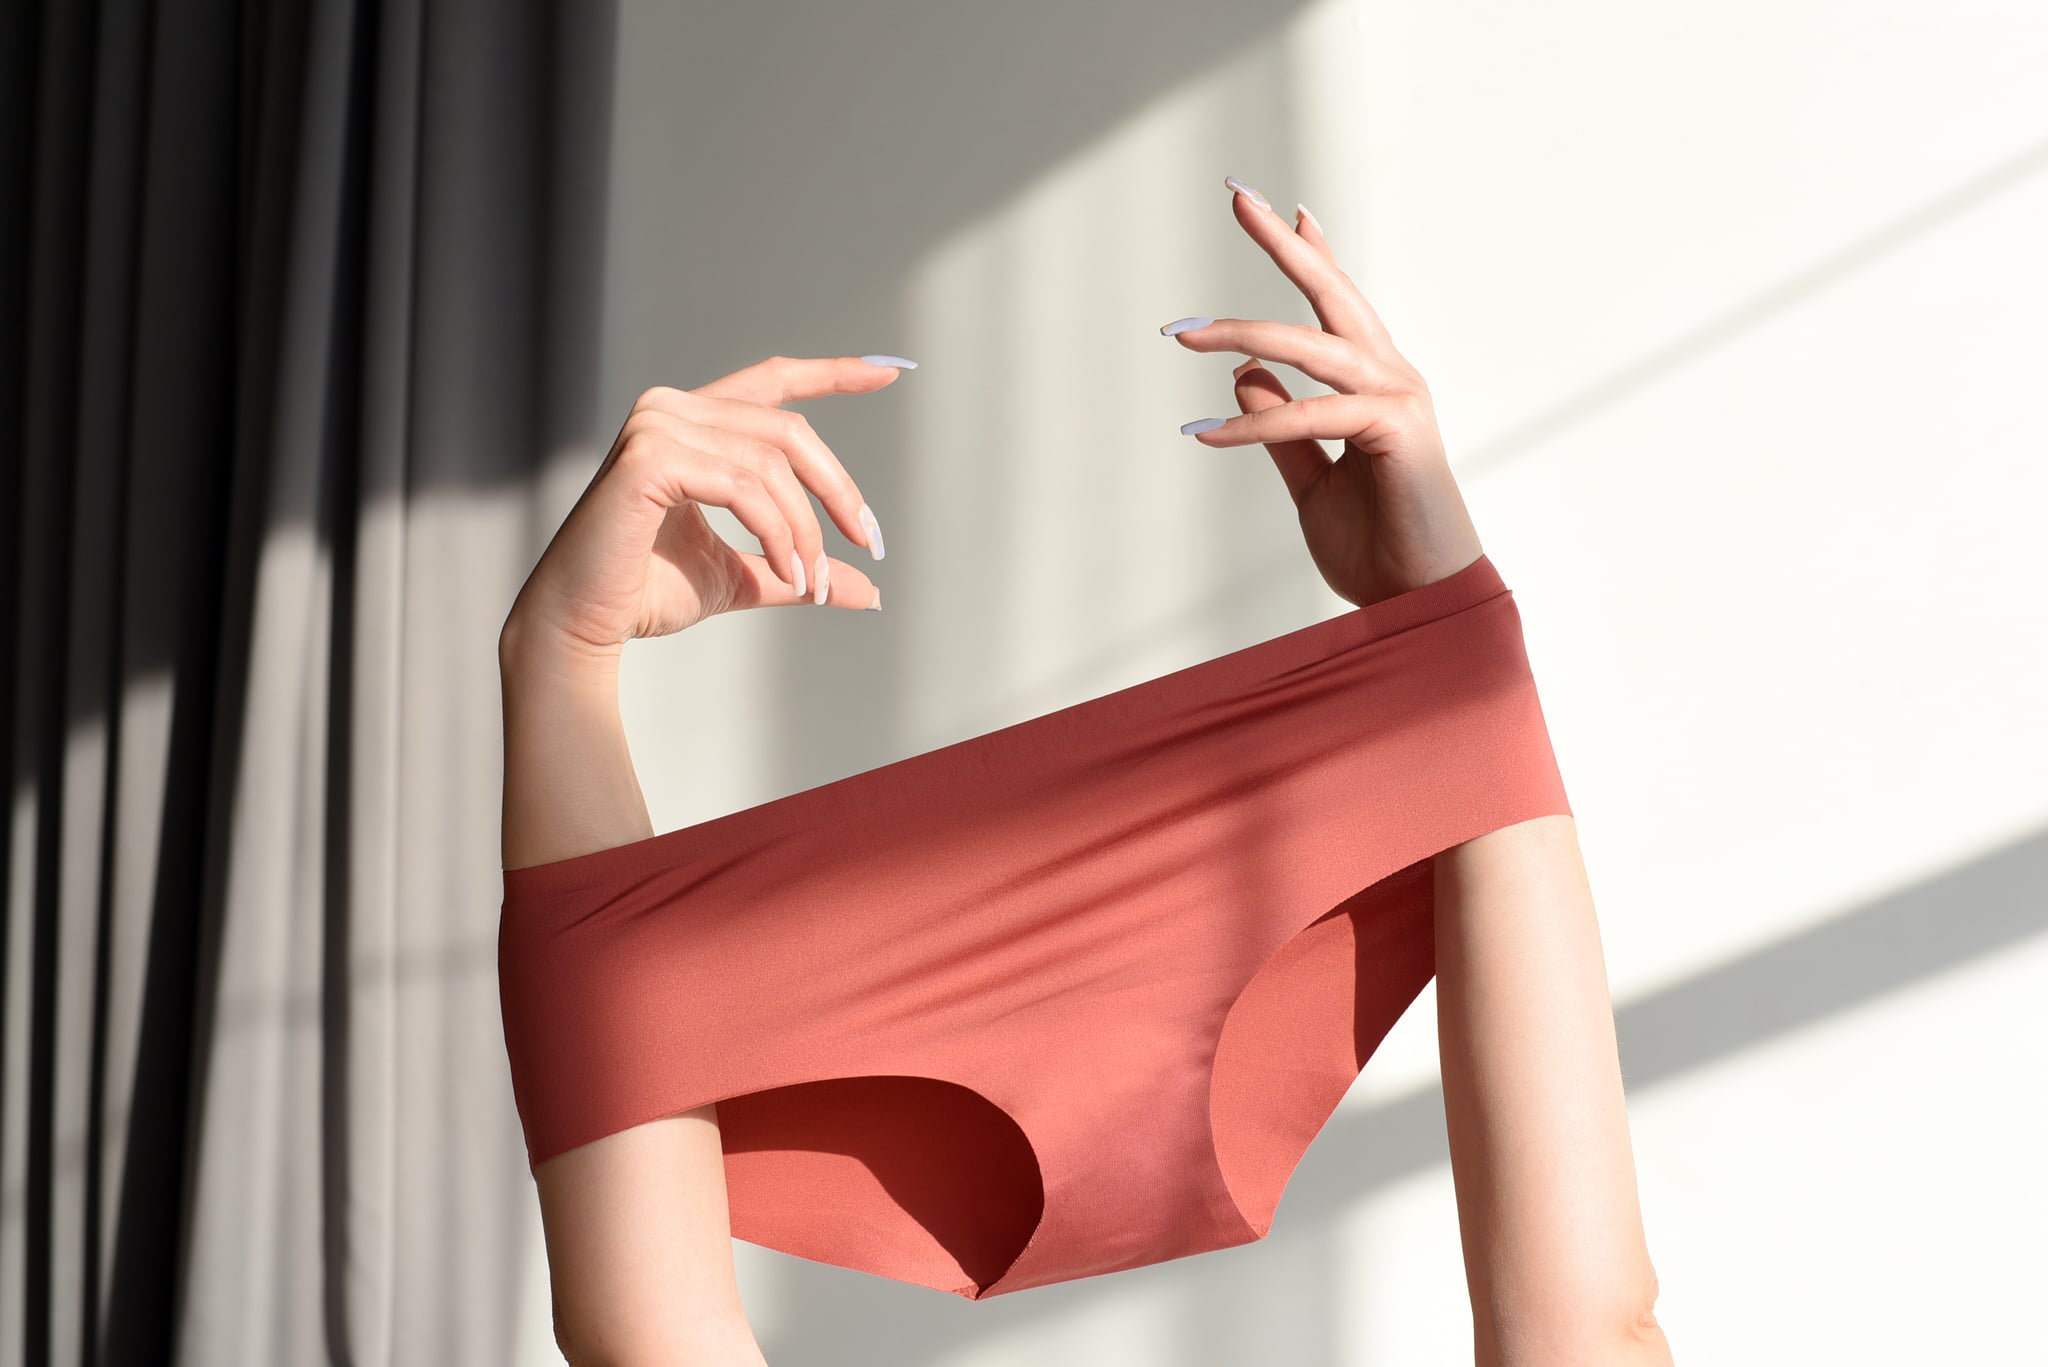 The Thinx Lawsuit Has Us Asking: Is Period Underwear Safe